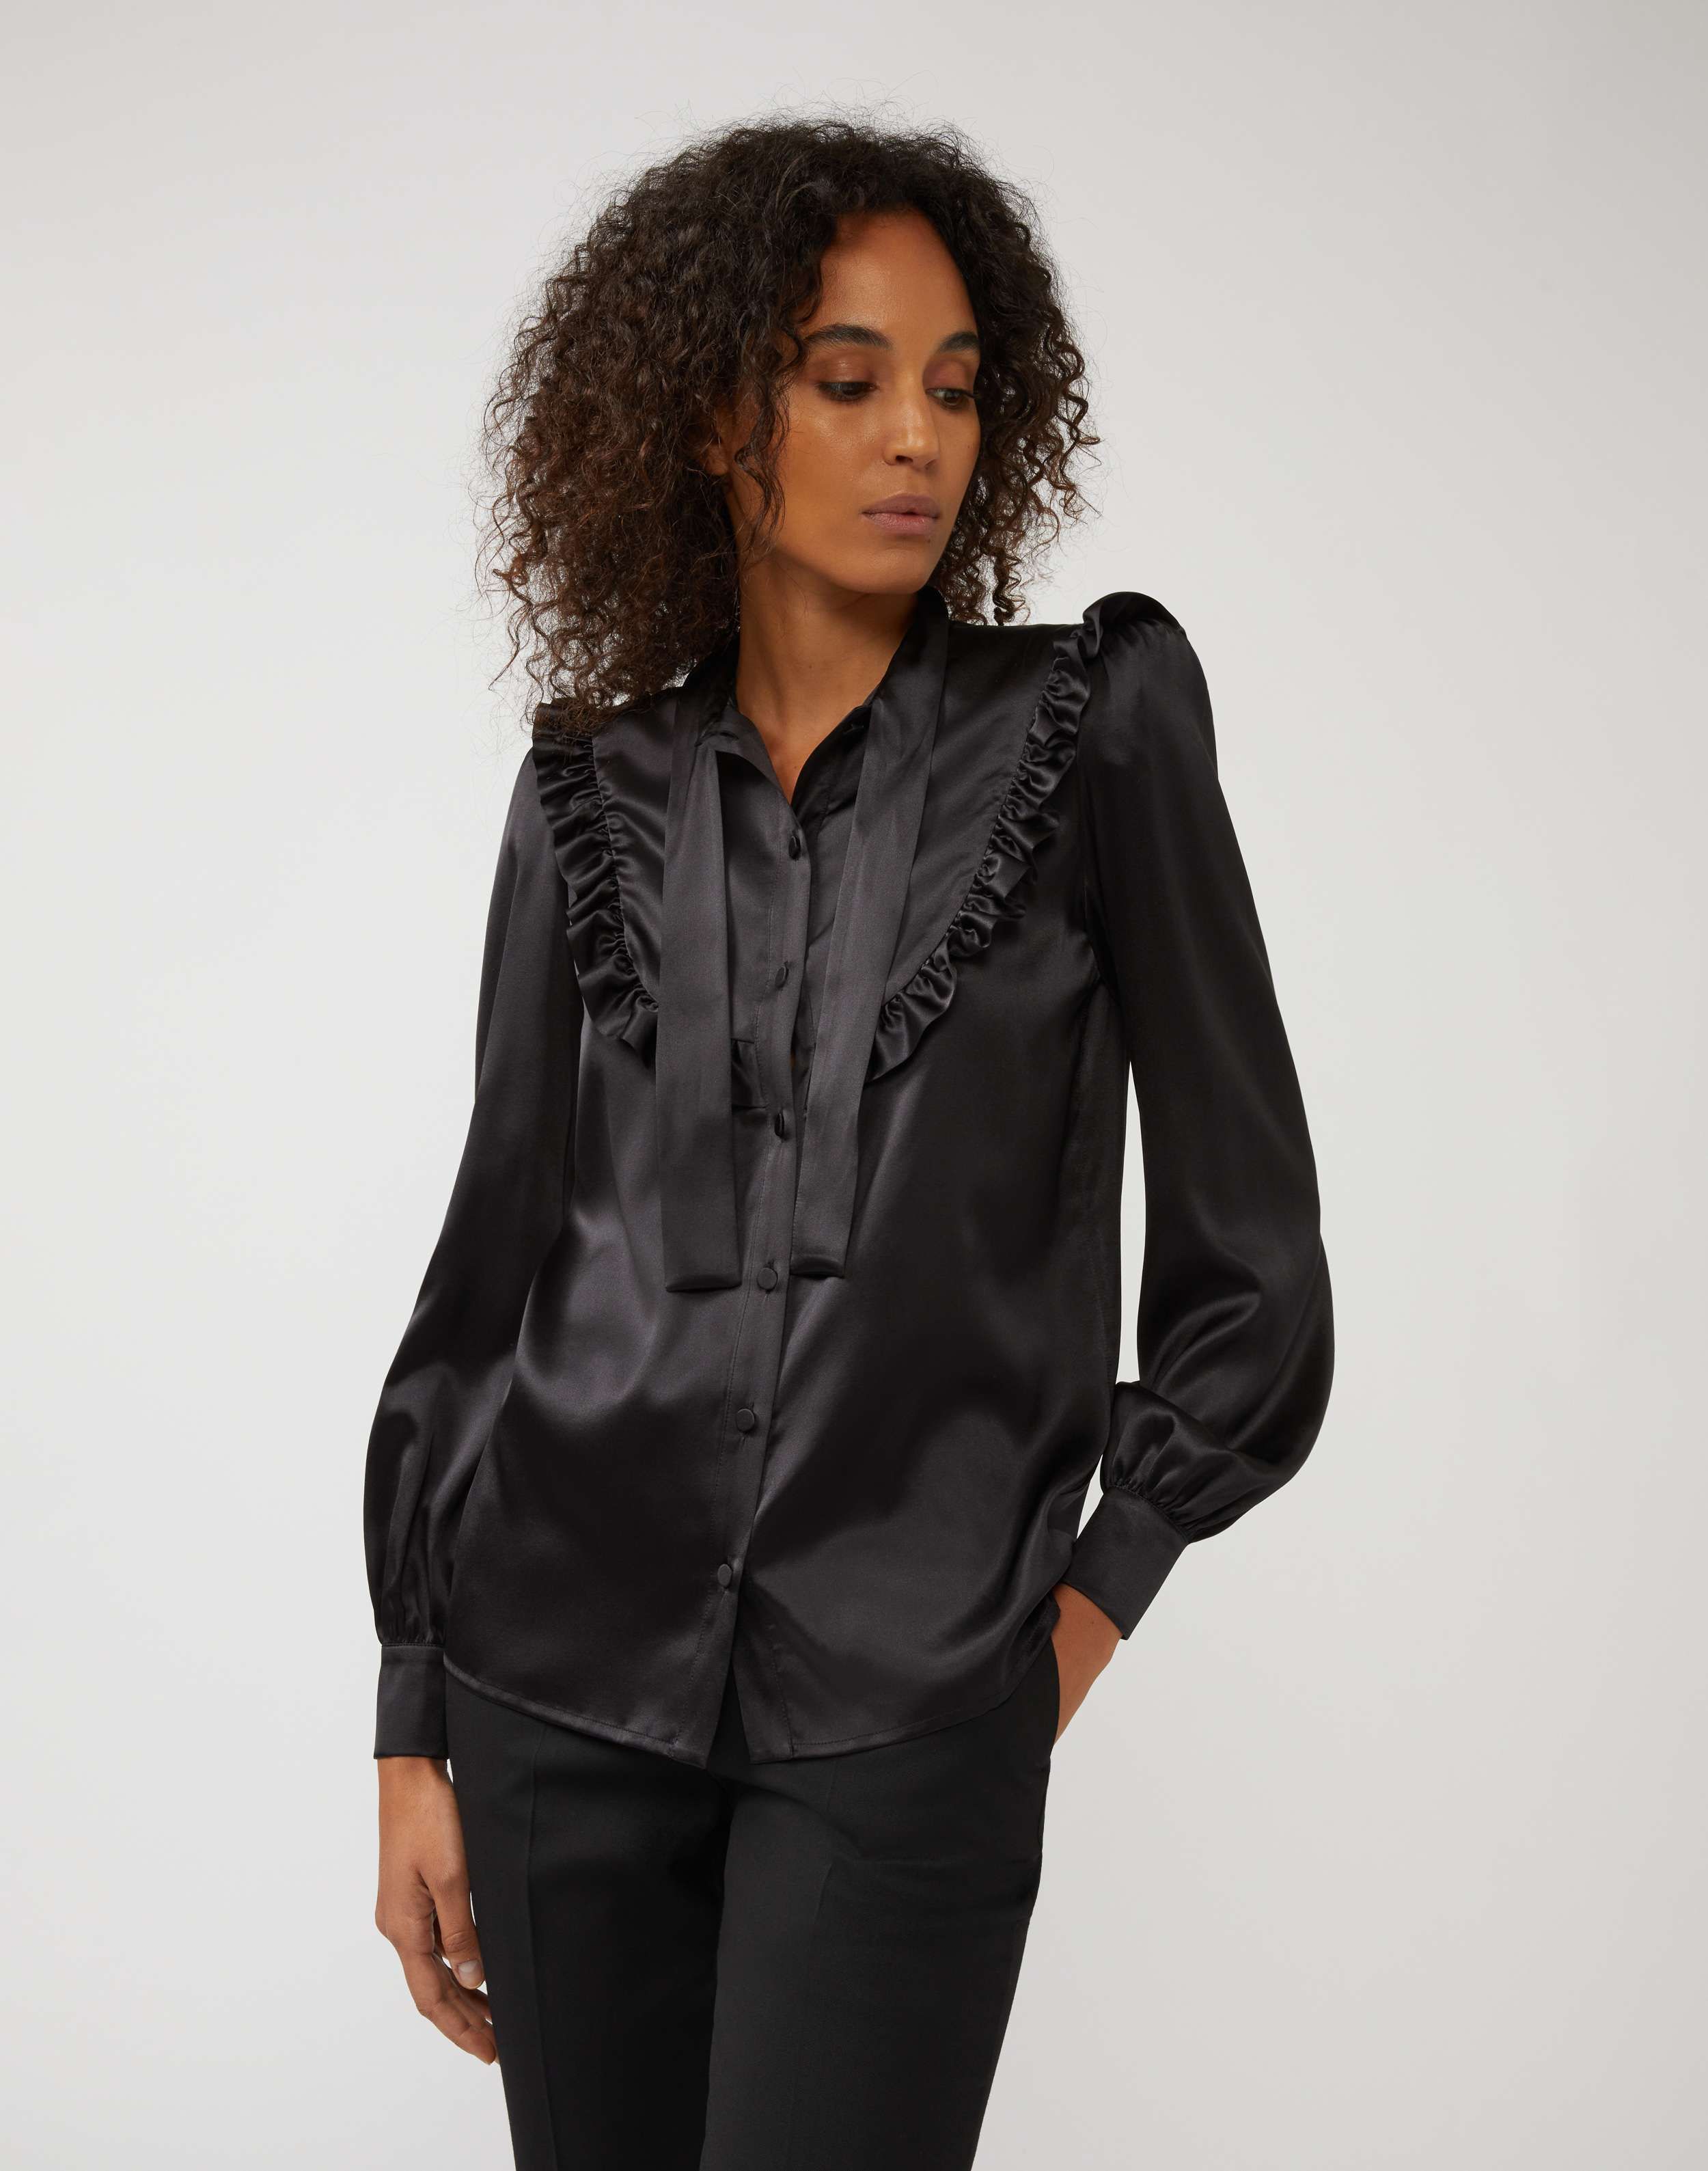 Shirt in black silk with ruffles and bow detail